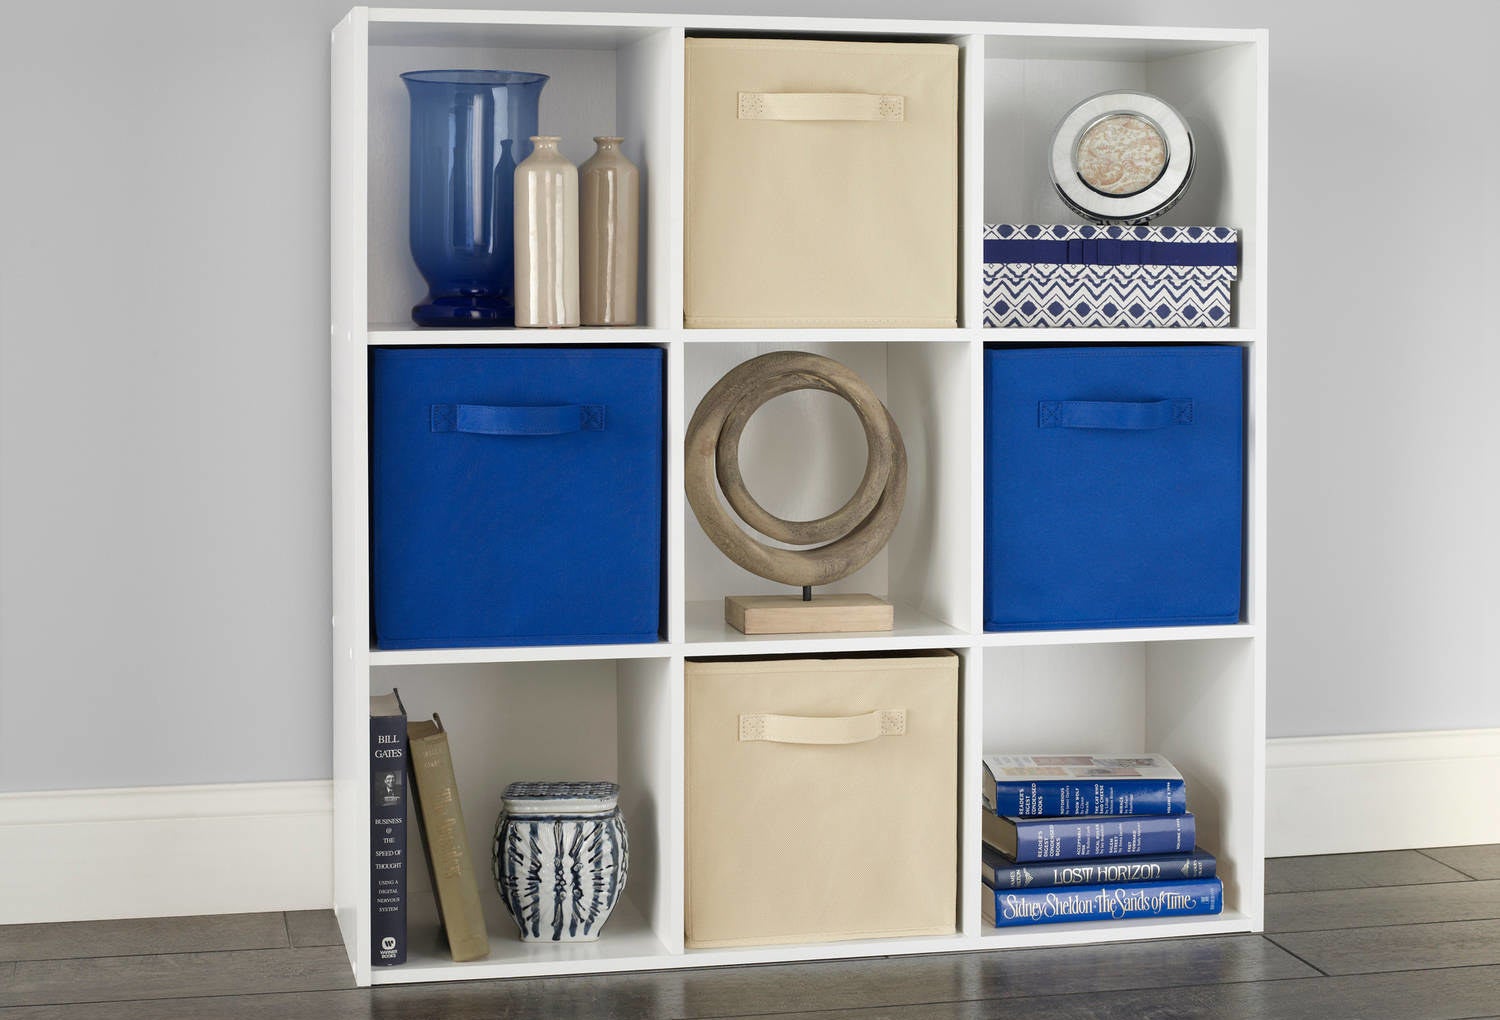 An image of a white nine-shelf organizer used to hold books, vases, and fabric storage bins